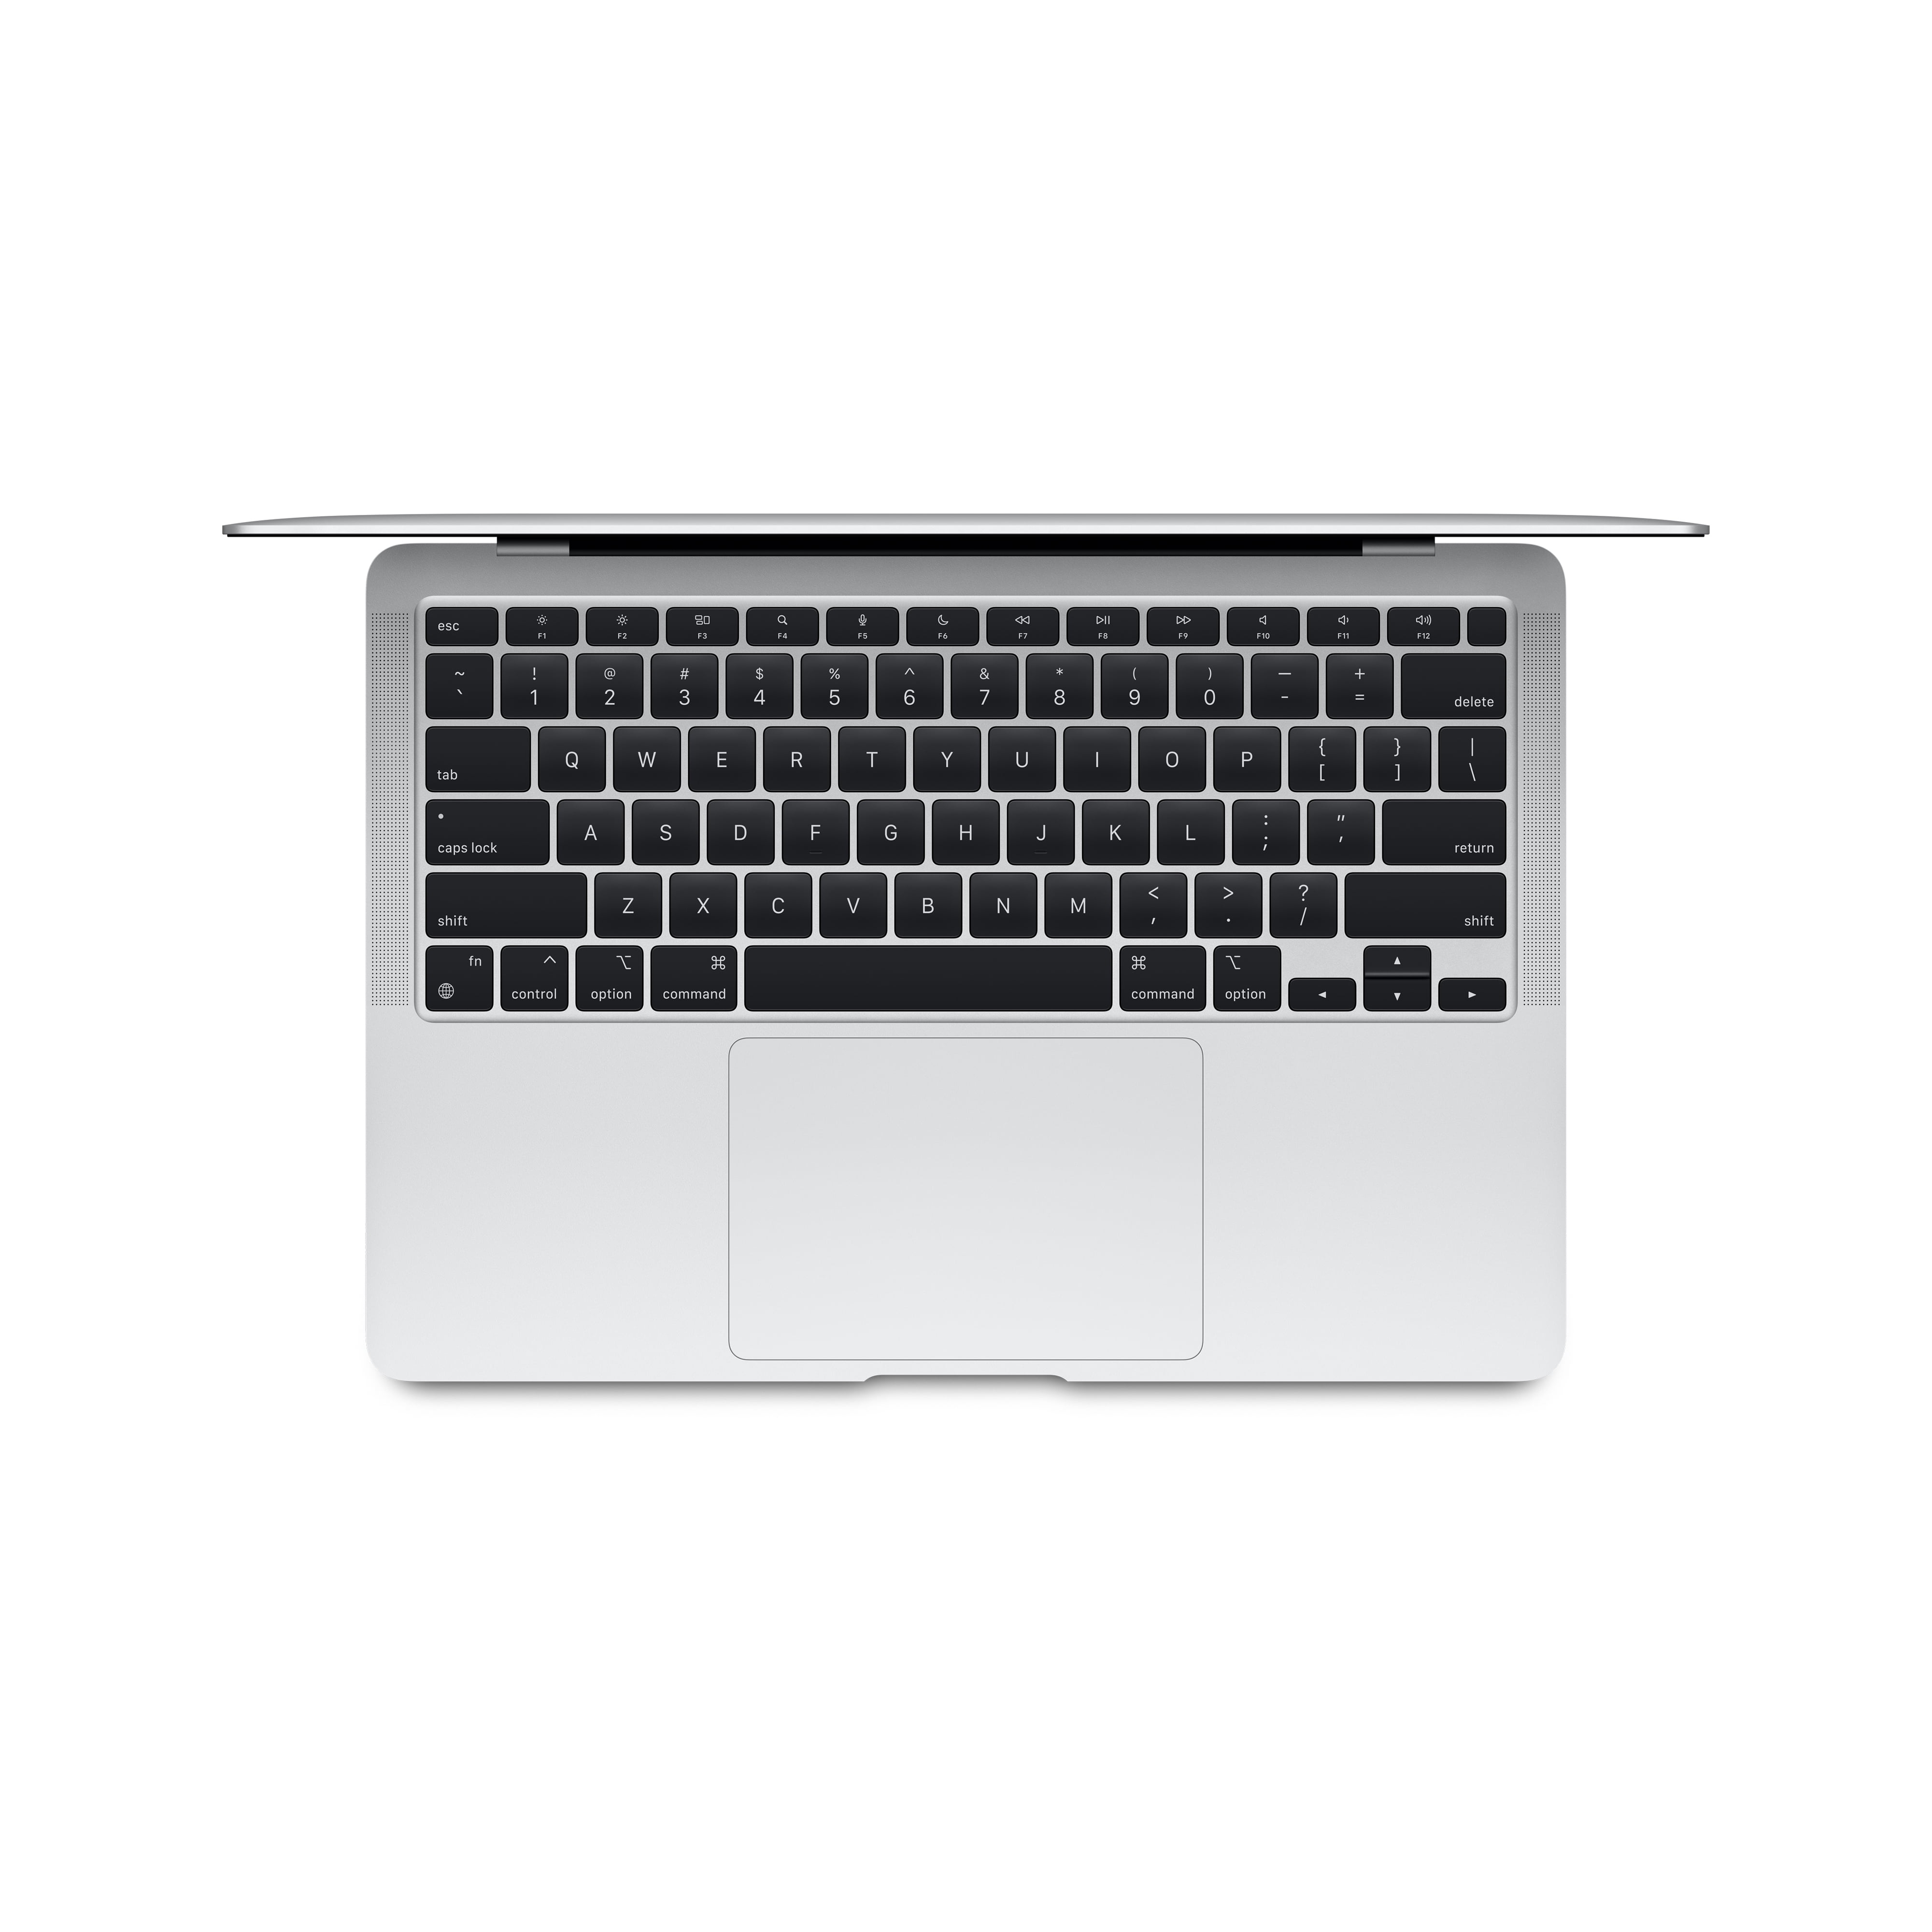 Apple MacBook Air 13.3 inch Laptop - Space Gray. M1 Chip